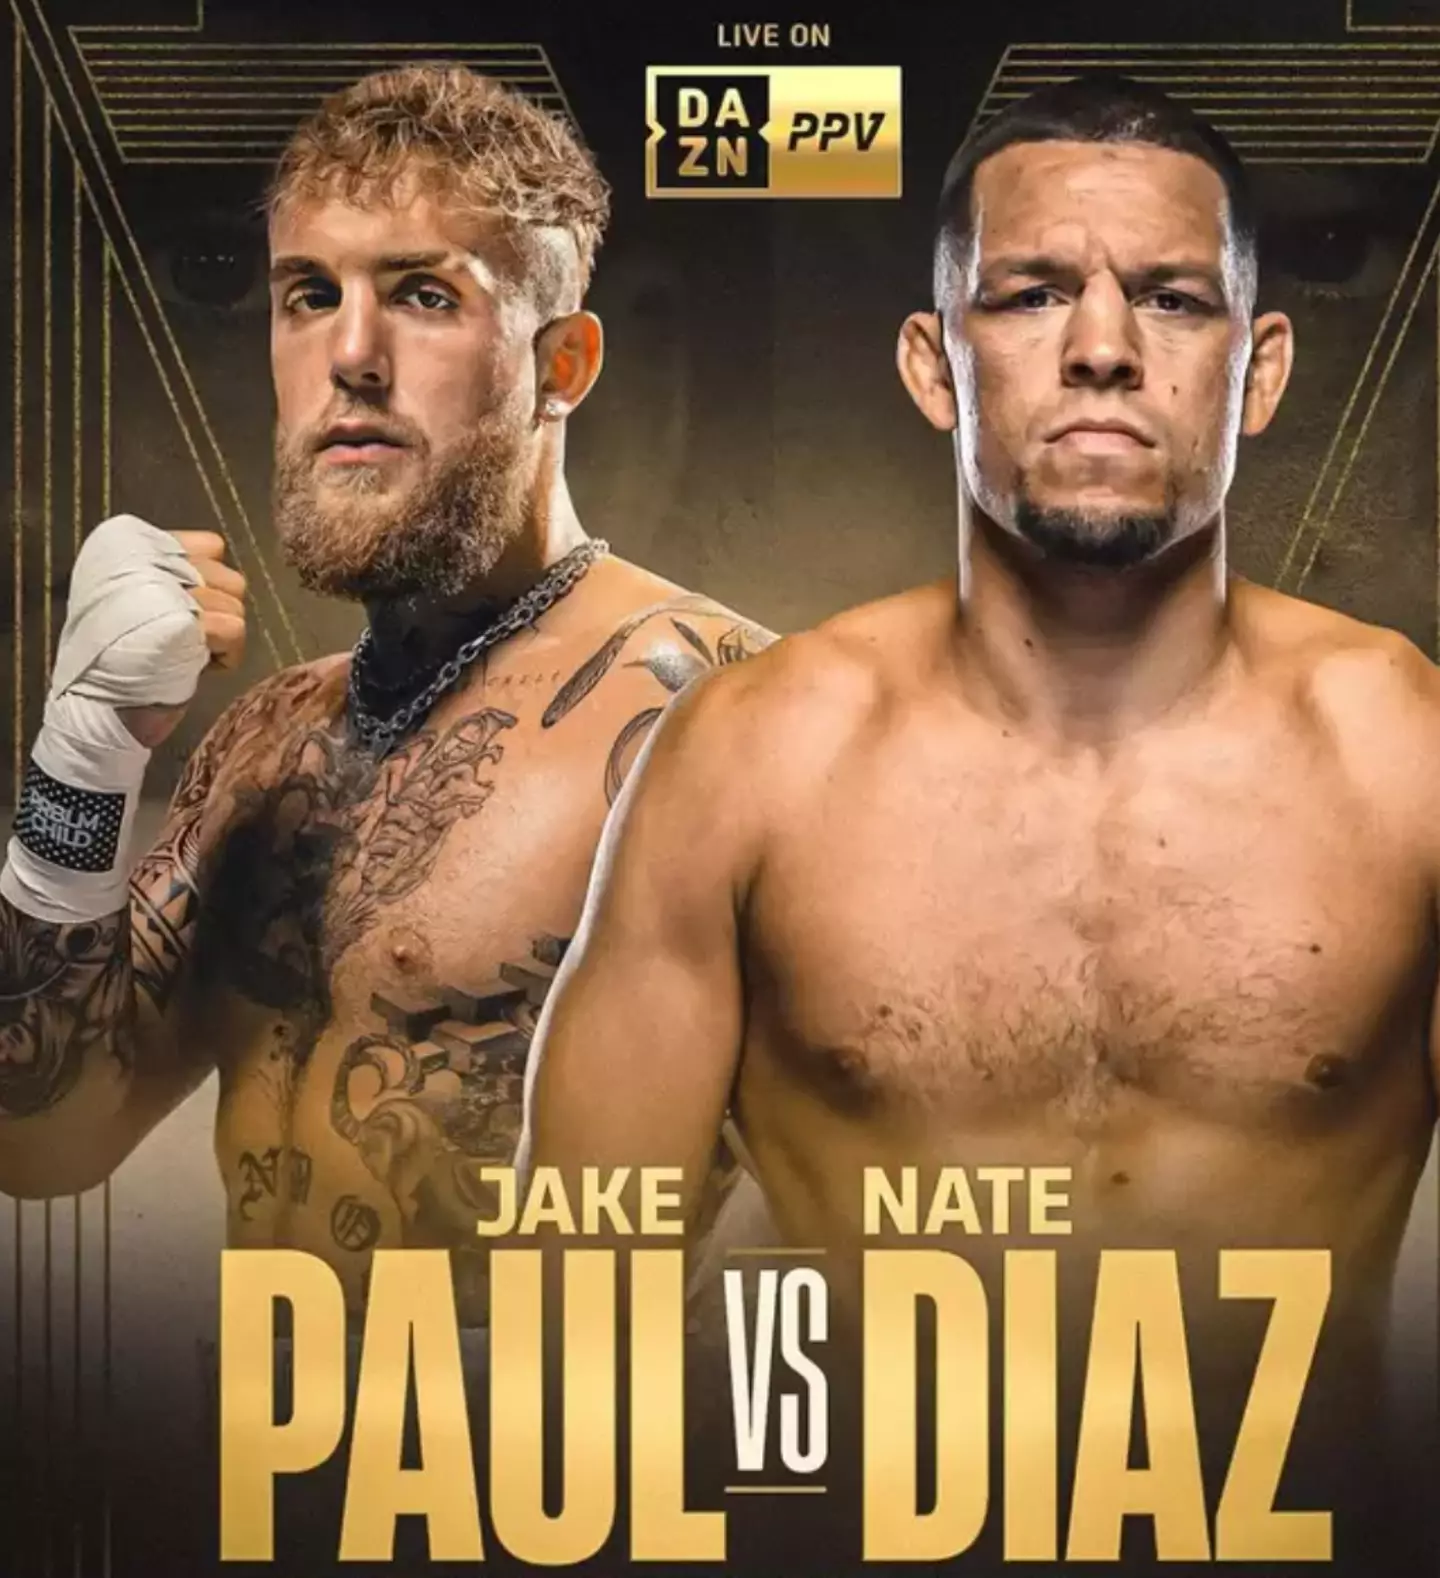 Jake Paul will fight Nate Diaz in Texas.